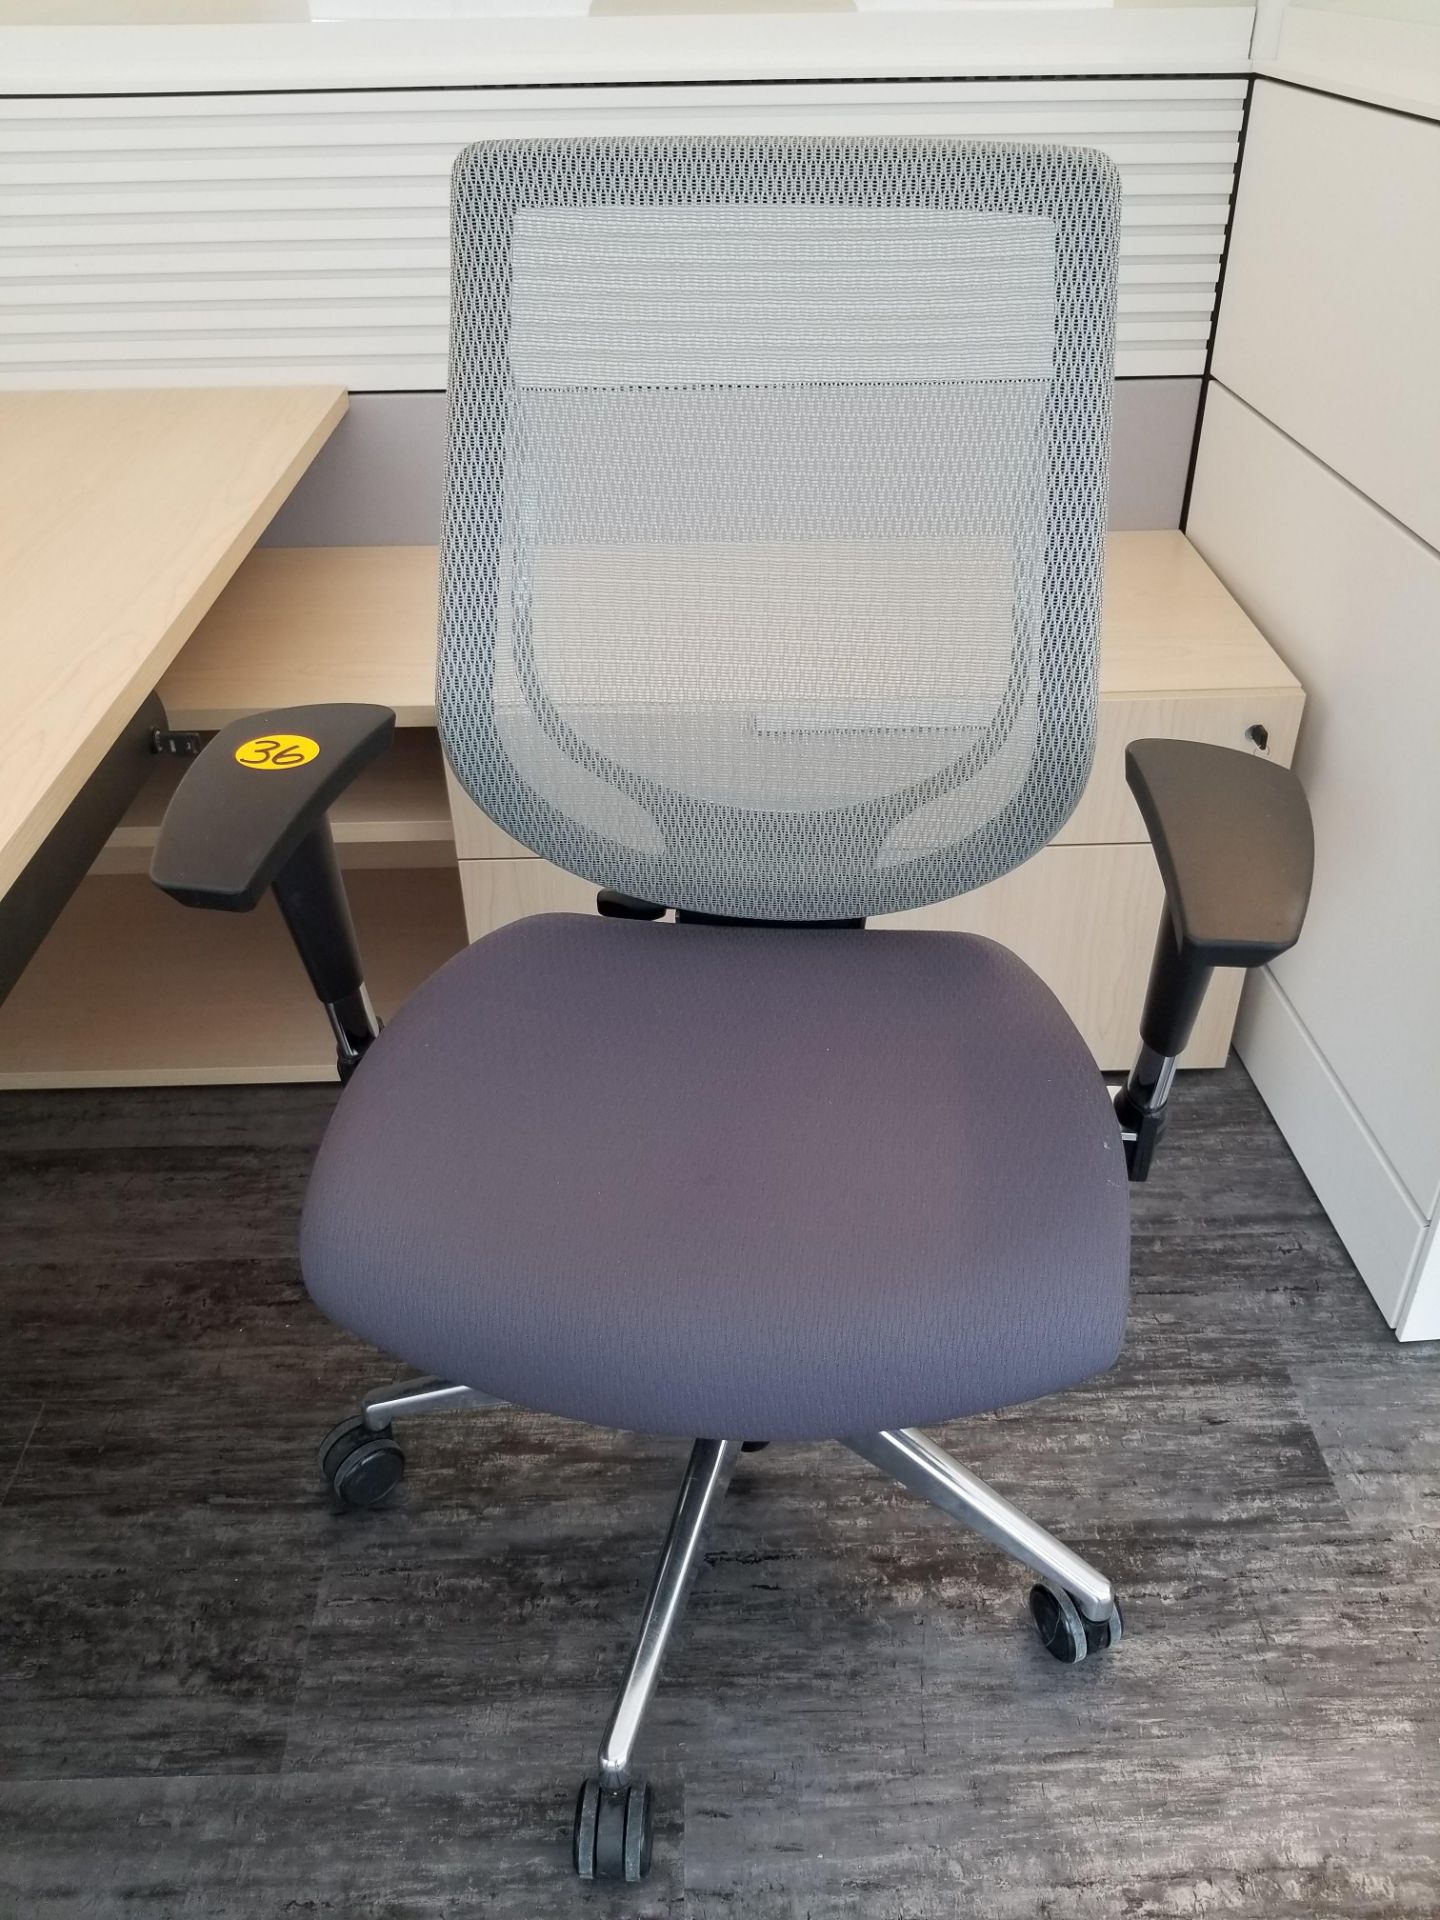 ALLSEATING - EXEC. CHAIR ON CASTERS, GREY W/ MESH BACK, ADJUSTABLE HEIGHT, ADJUSTABLE ARMS